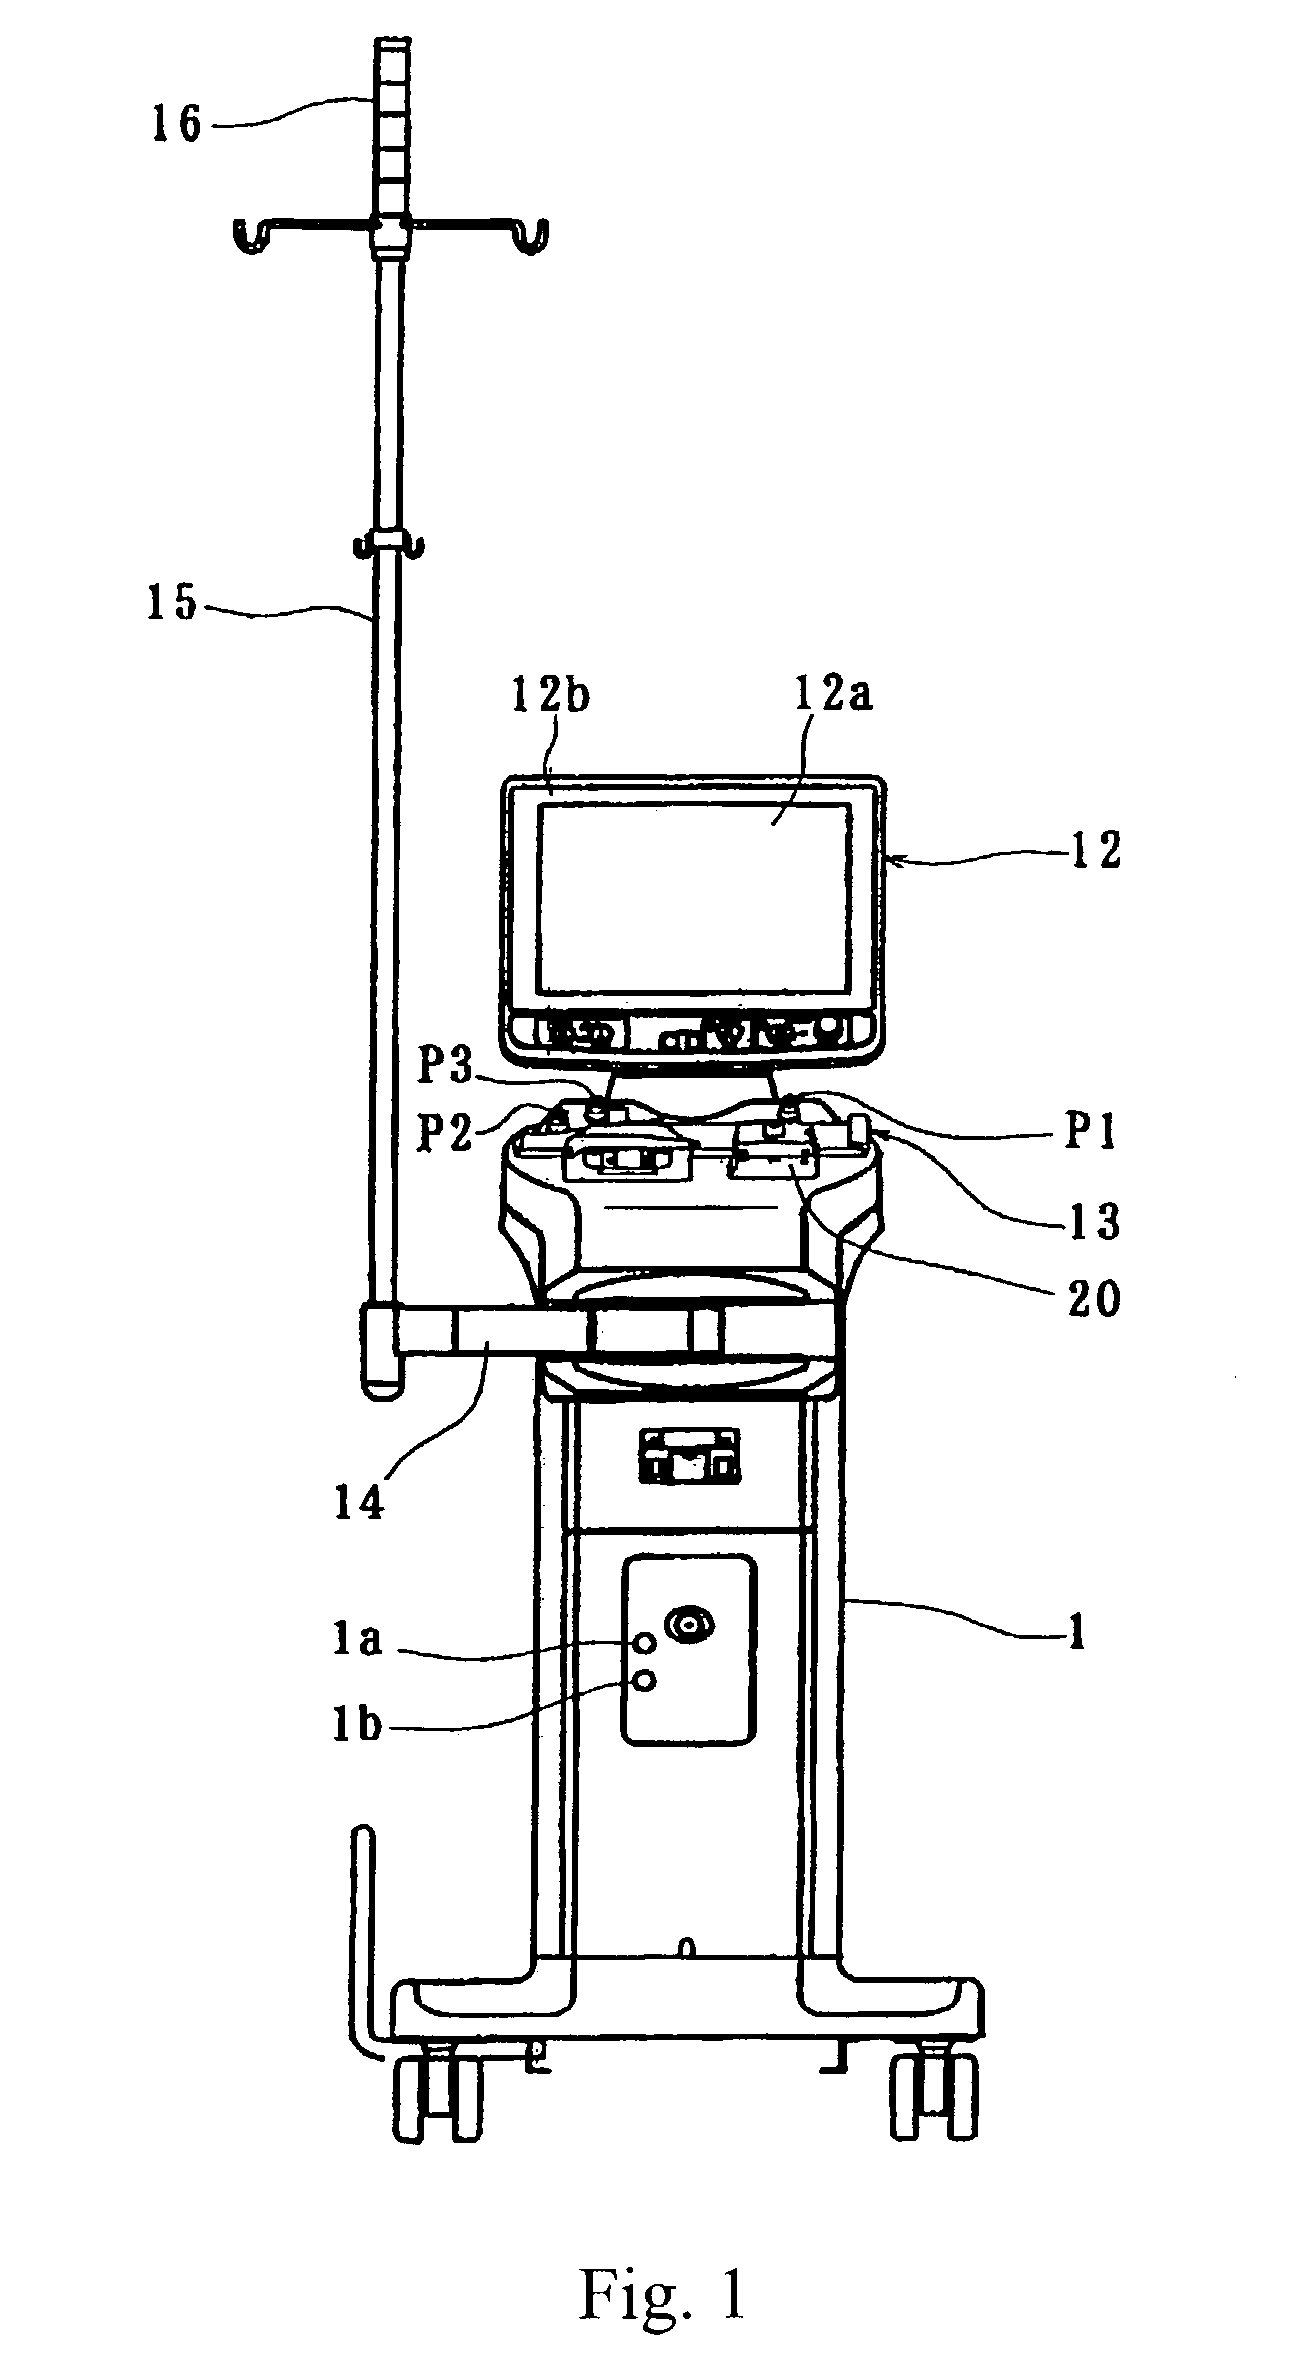 Medical device